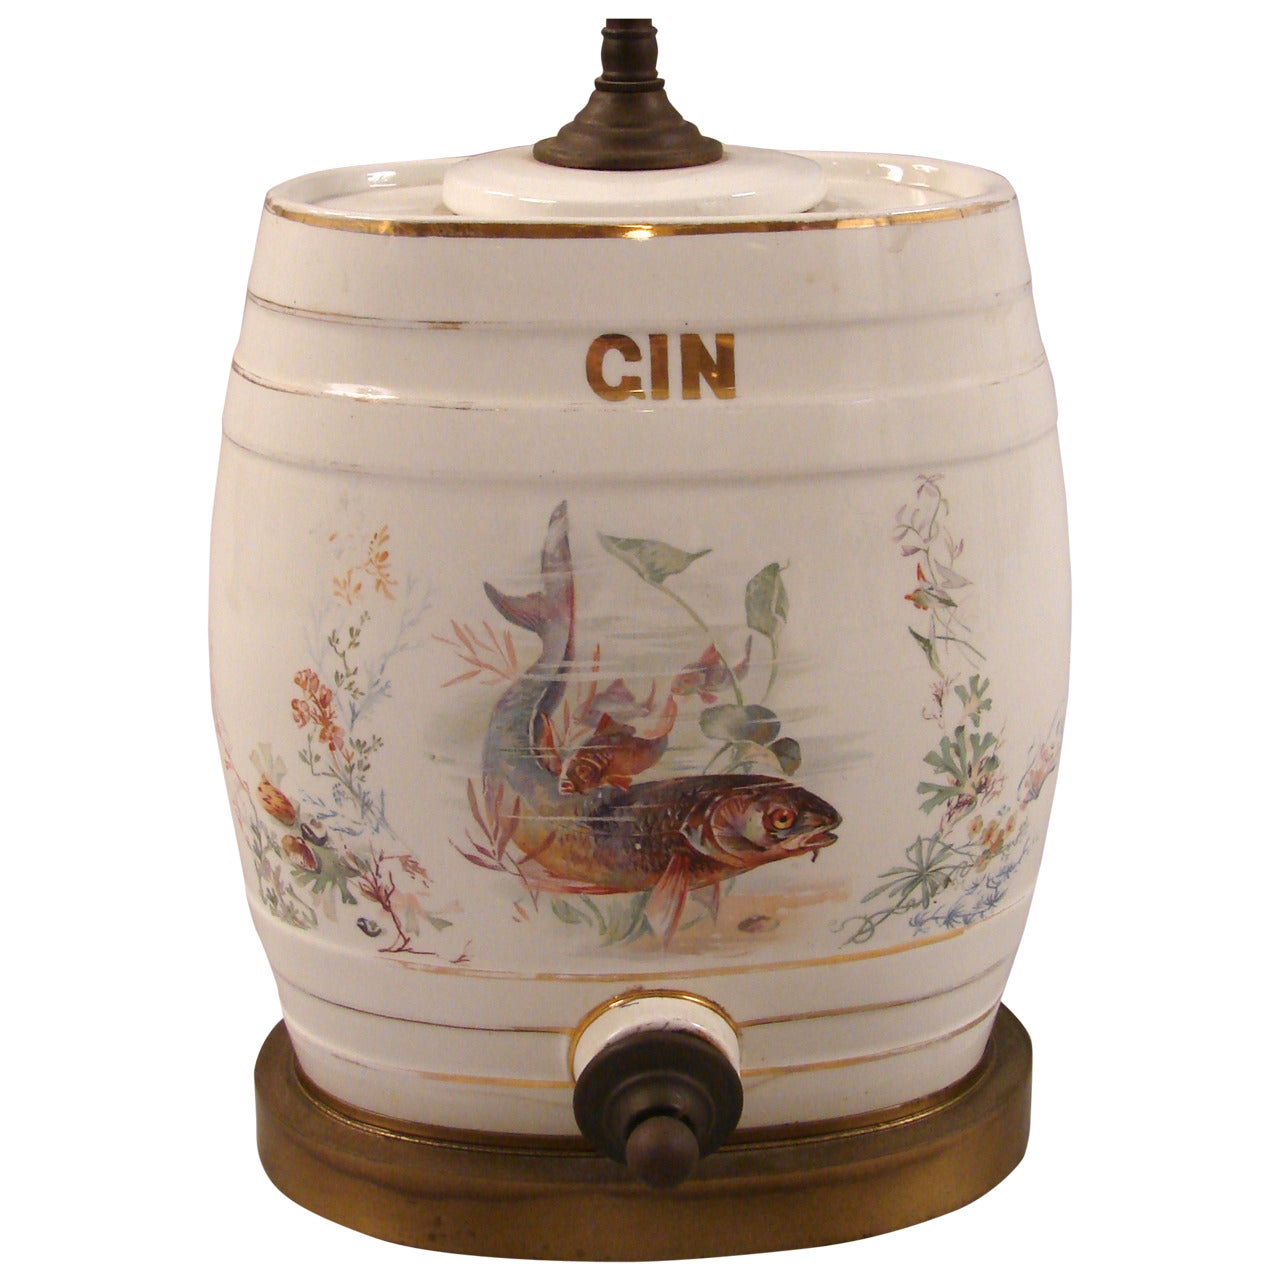 English Victorian Porcelain Gin Dispenser with Trout Decoration